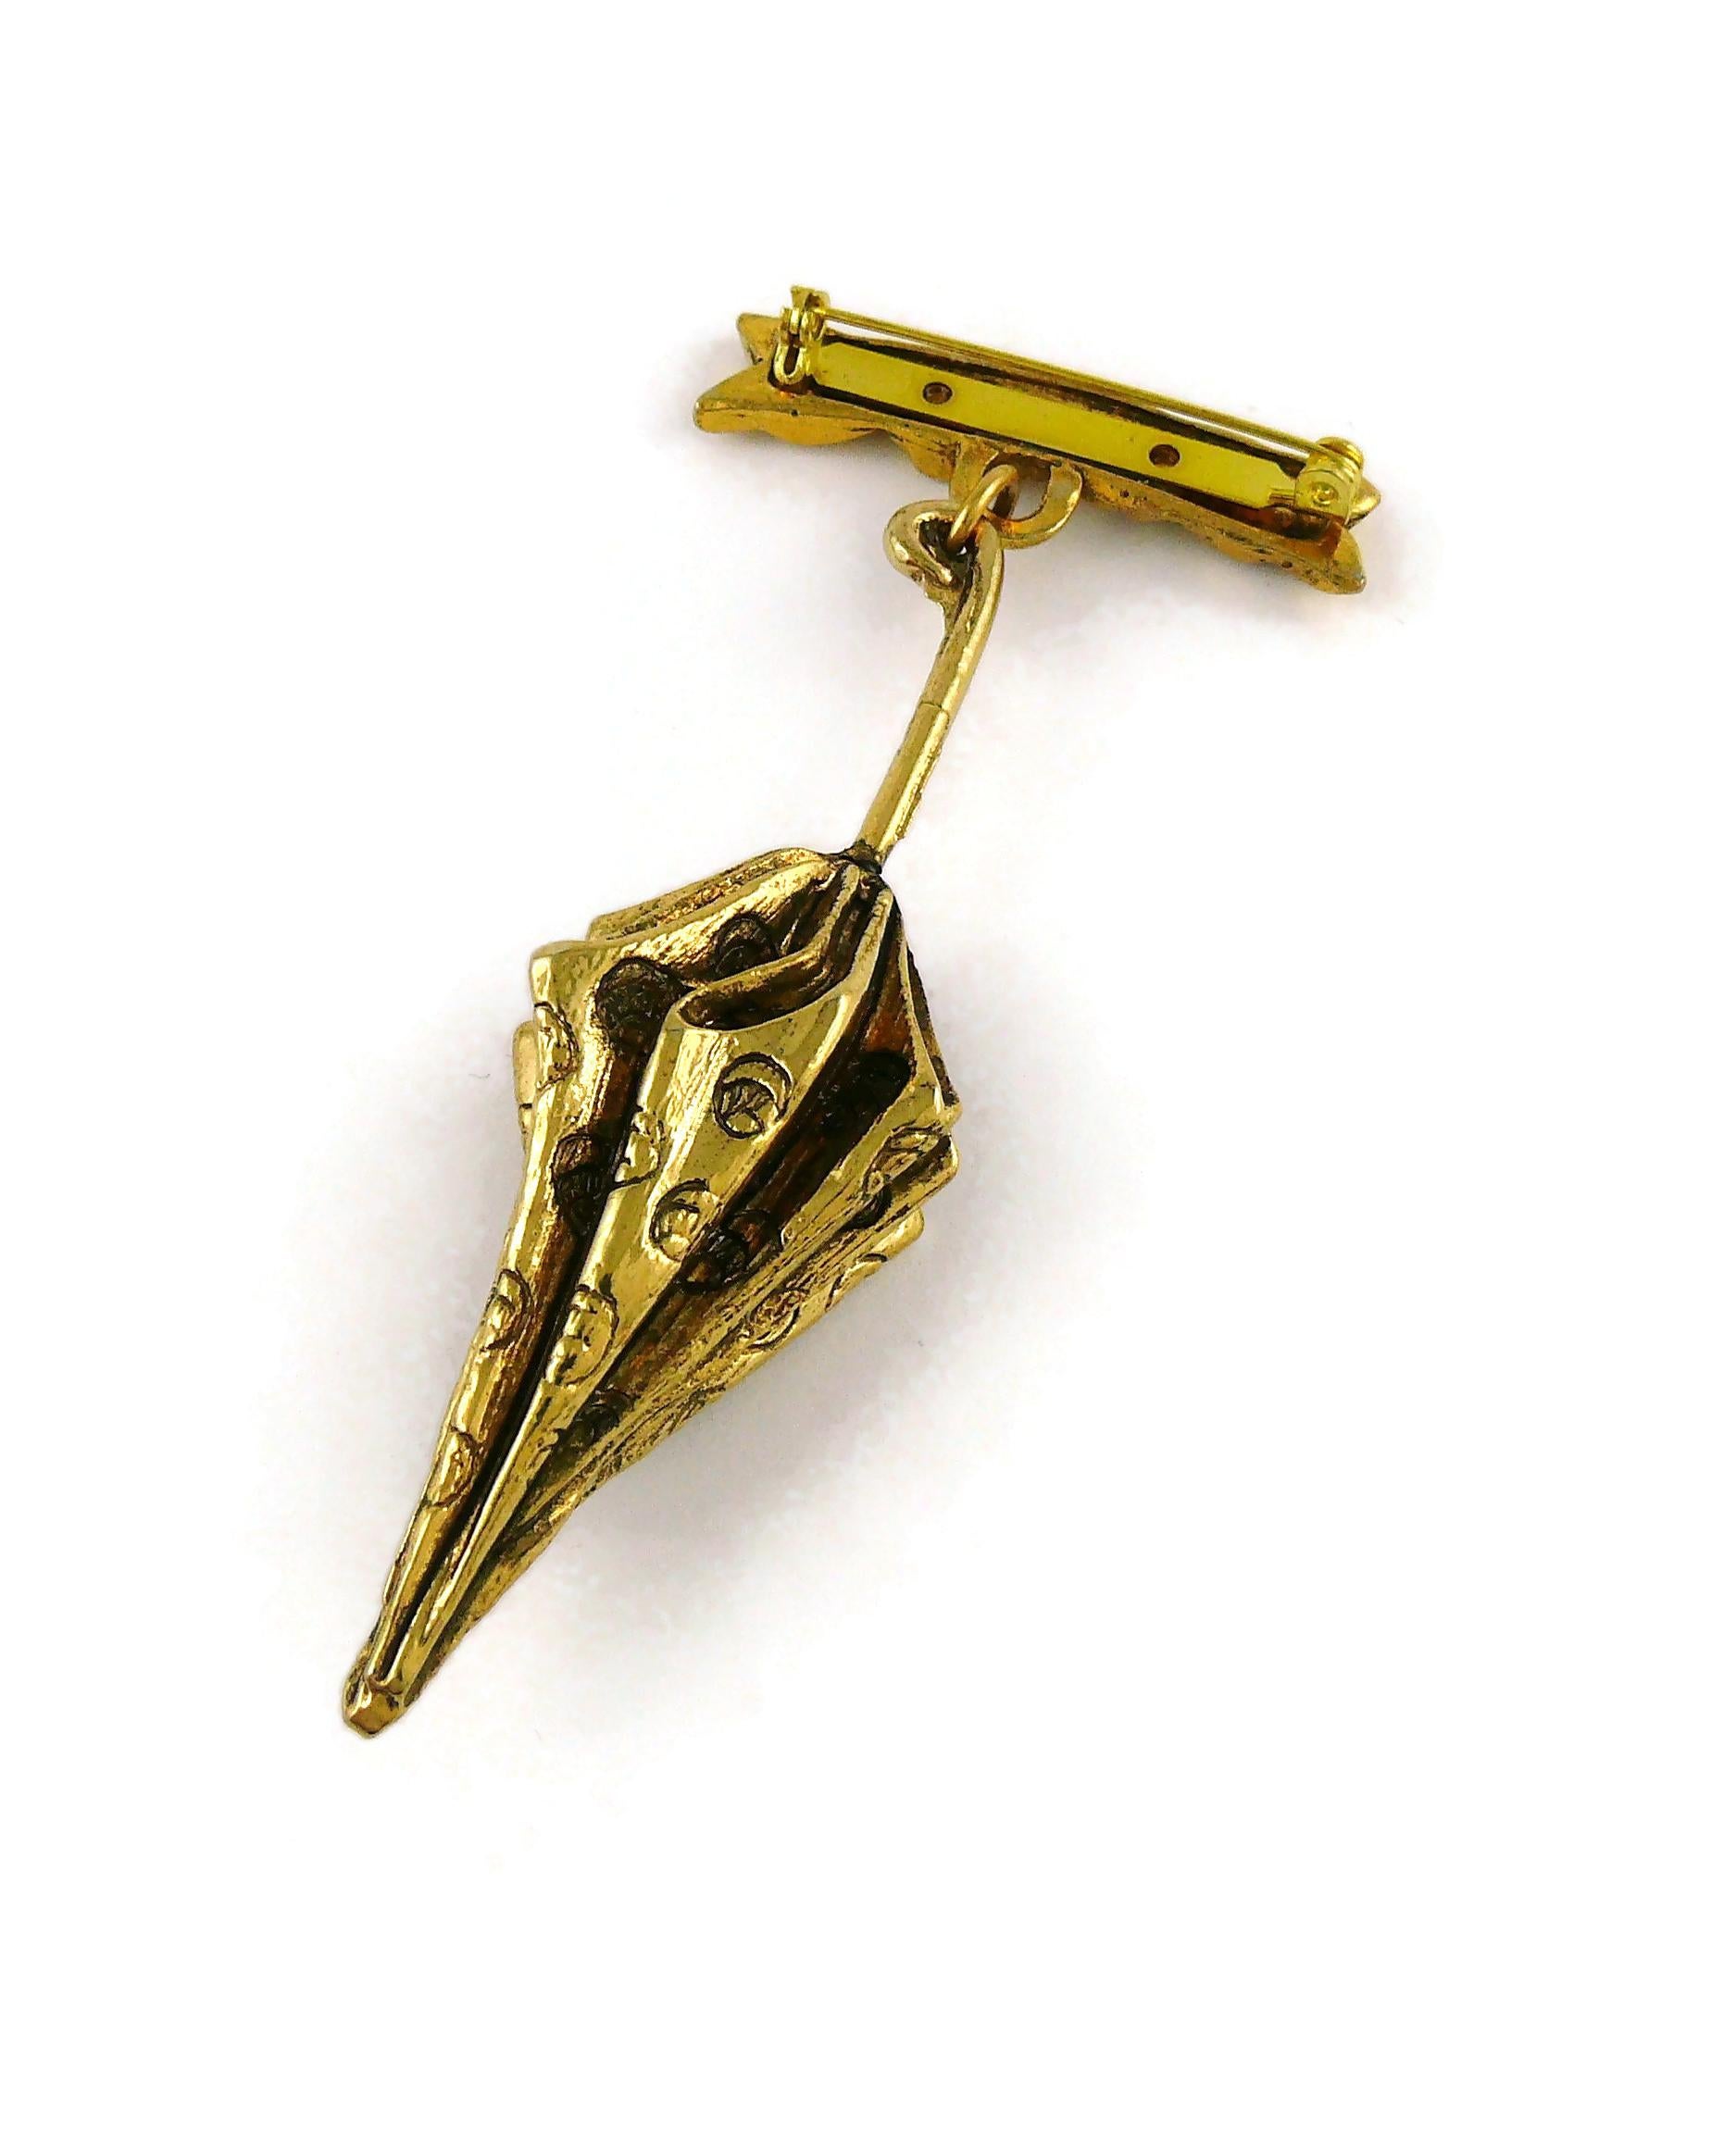 Women's Chantal Thomass (Attributed to) Vintage Umbrella Brooch For Sale